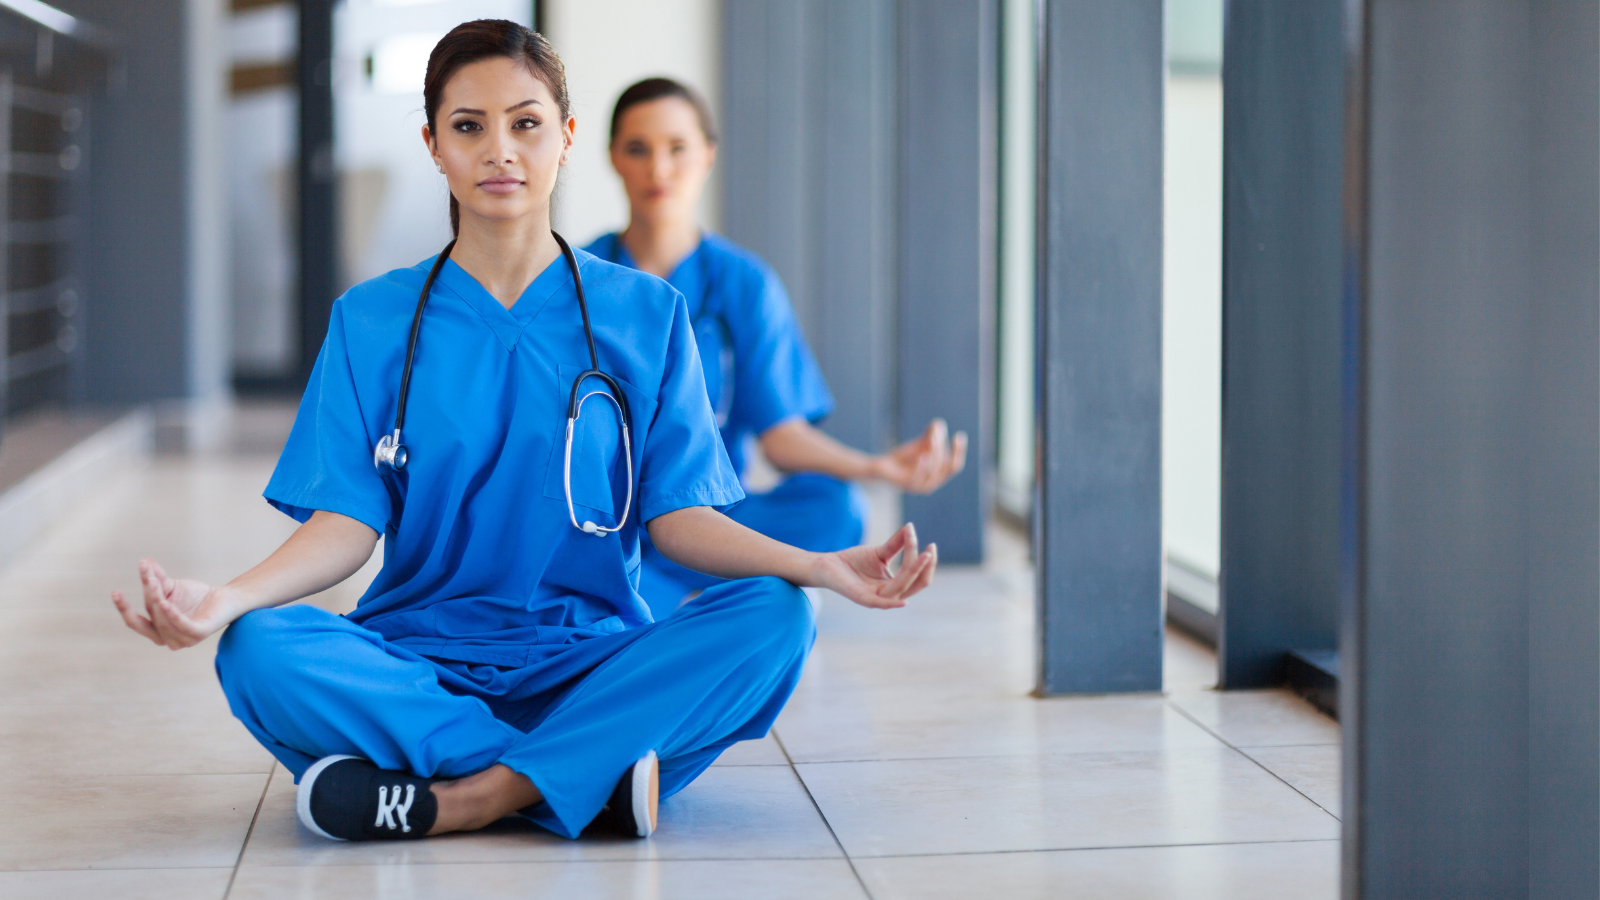 Two young healthcare workers meditation during break to release work pressure